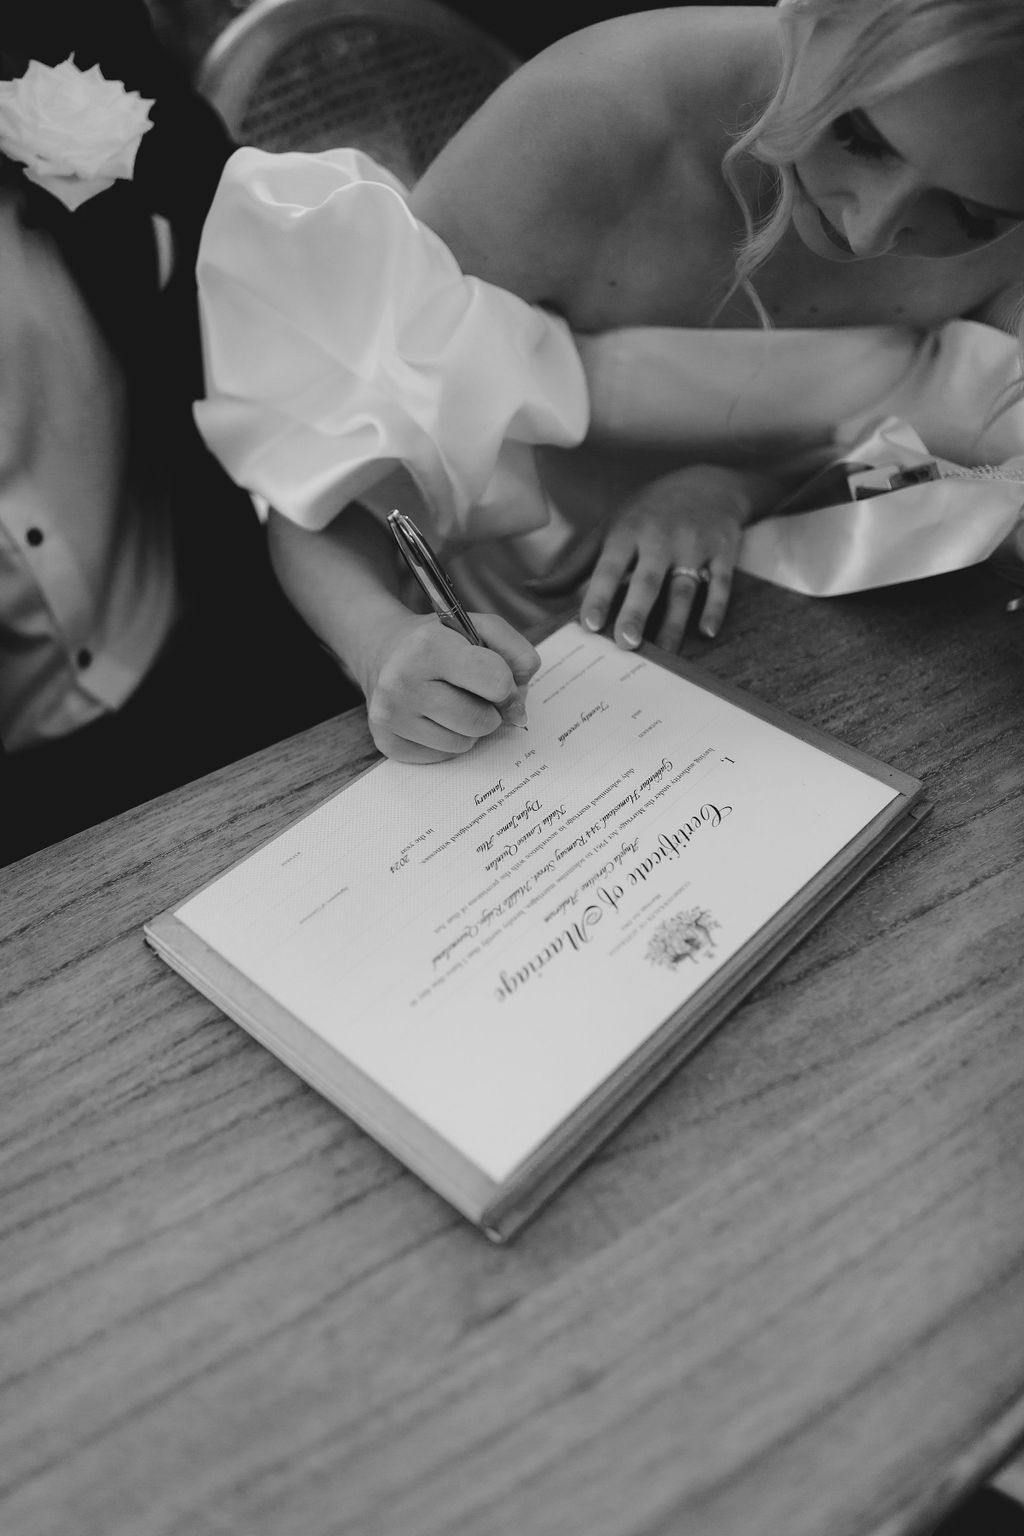 A black and white photo of a bride signing a marriage certificate on a wooden table. She is wearing a wedding dress with puffed sleeves and has blonde hair. A man in a suit, partially visible, is seated next to her.